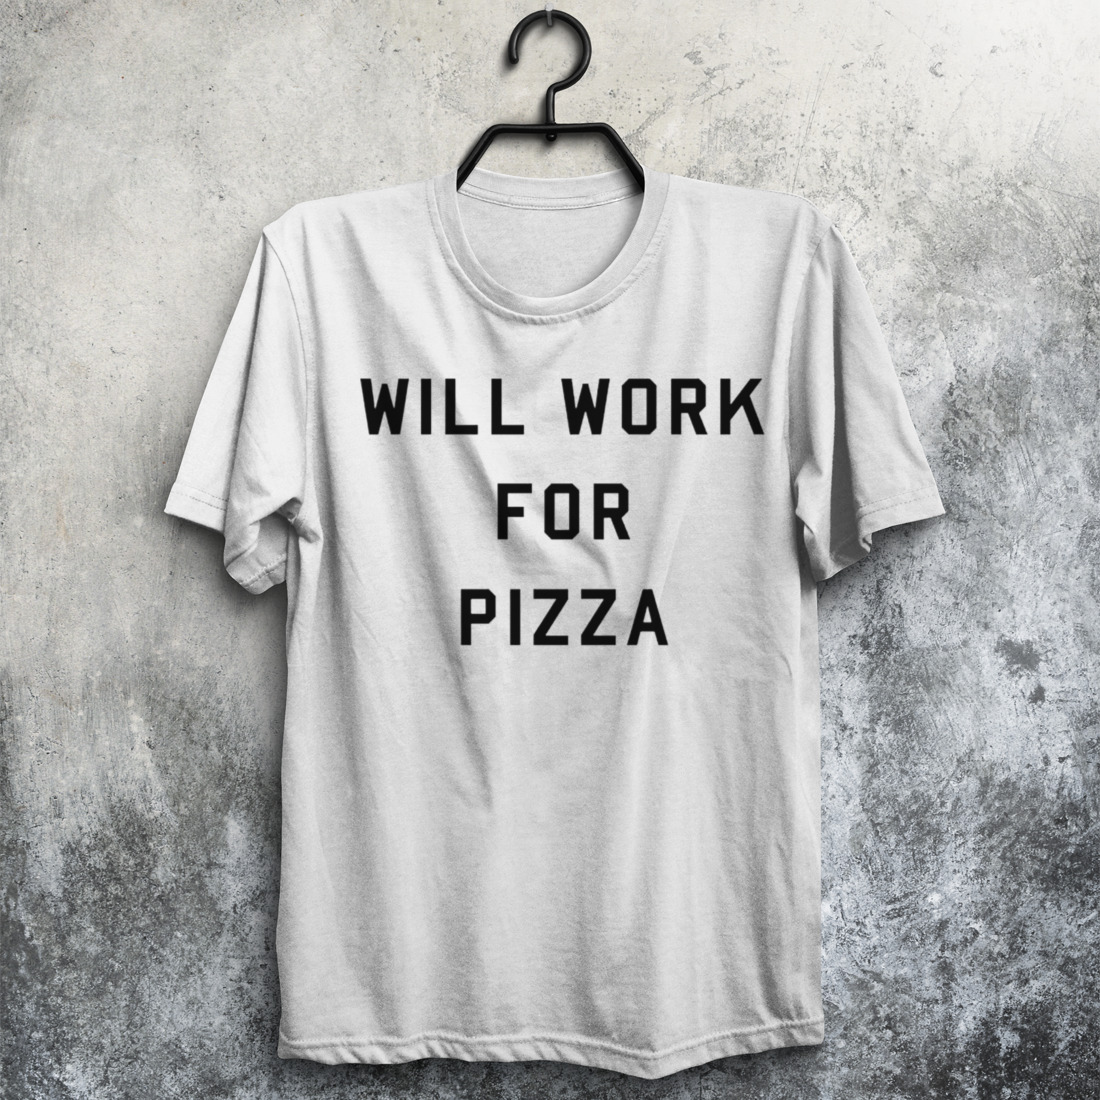 Will work for pizza shirt